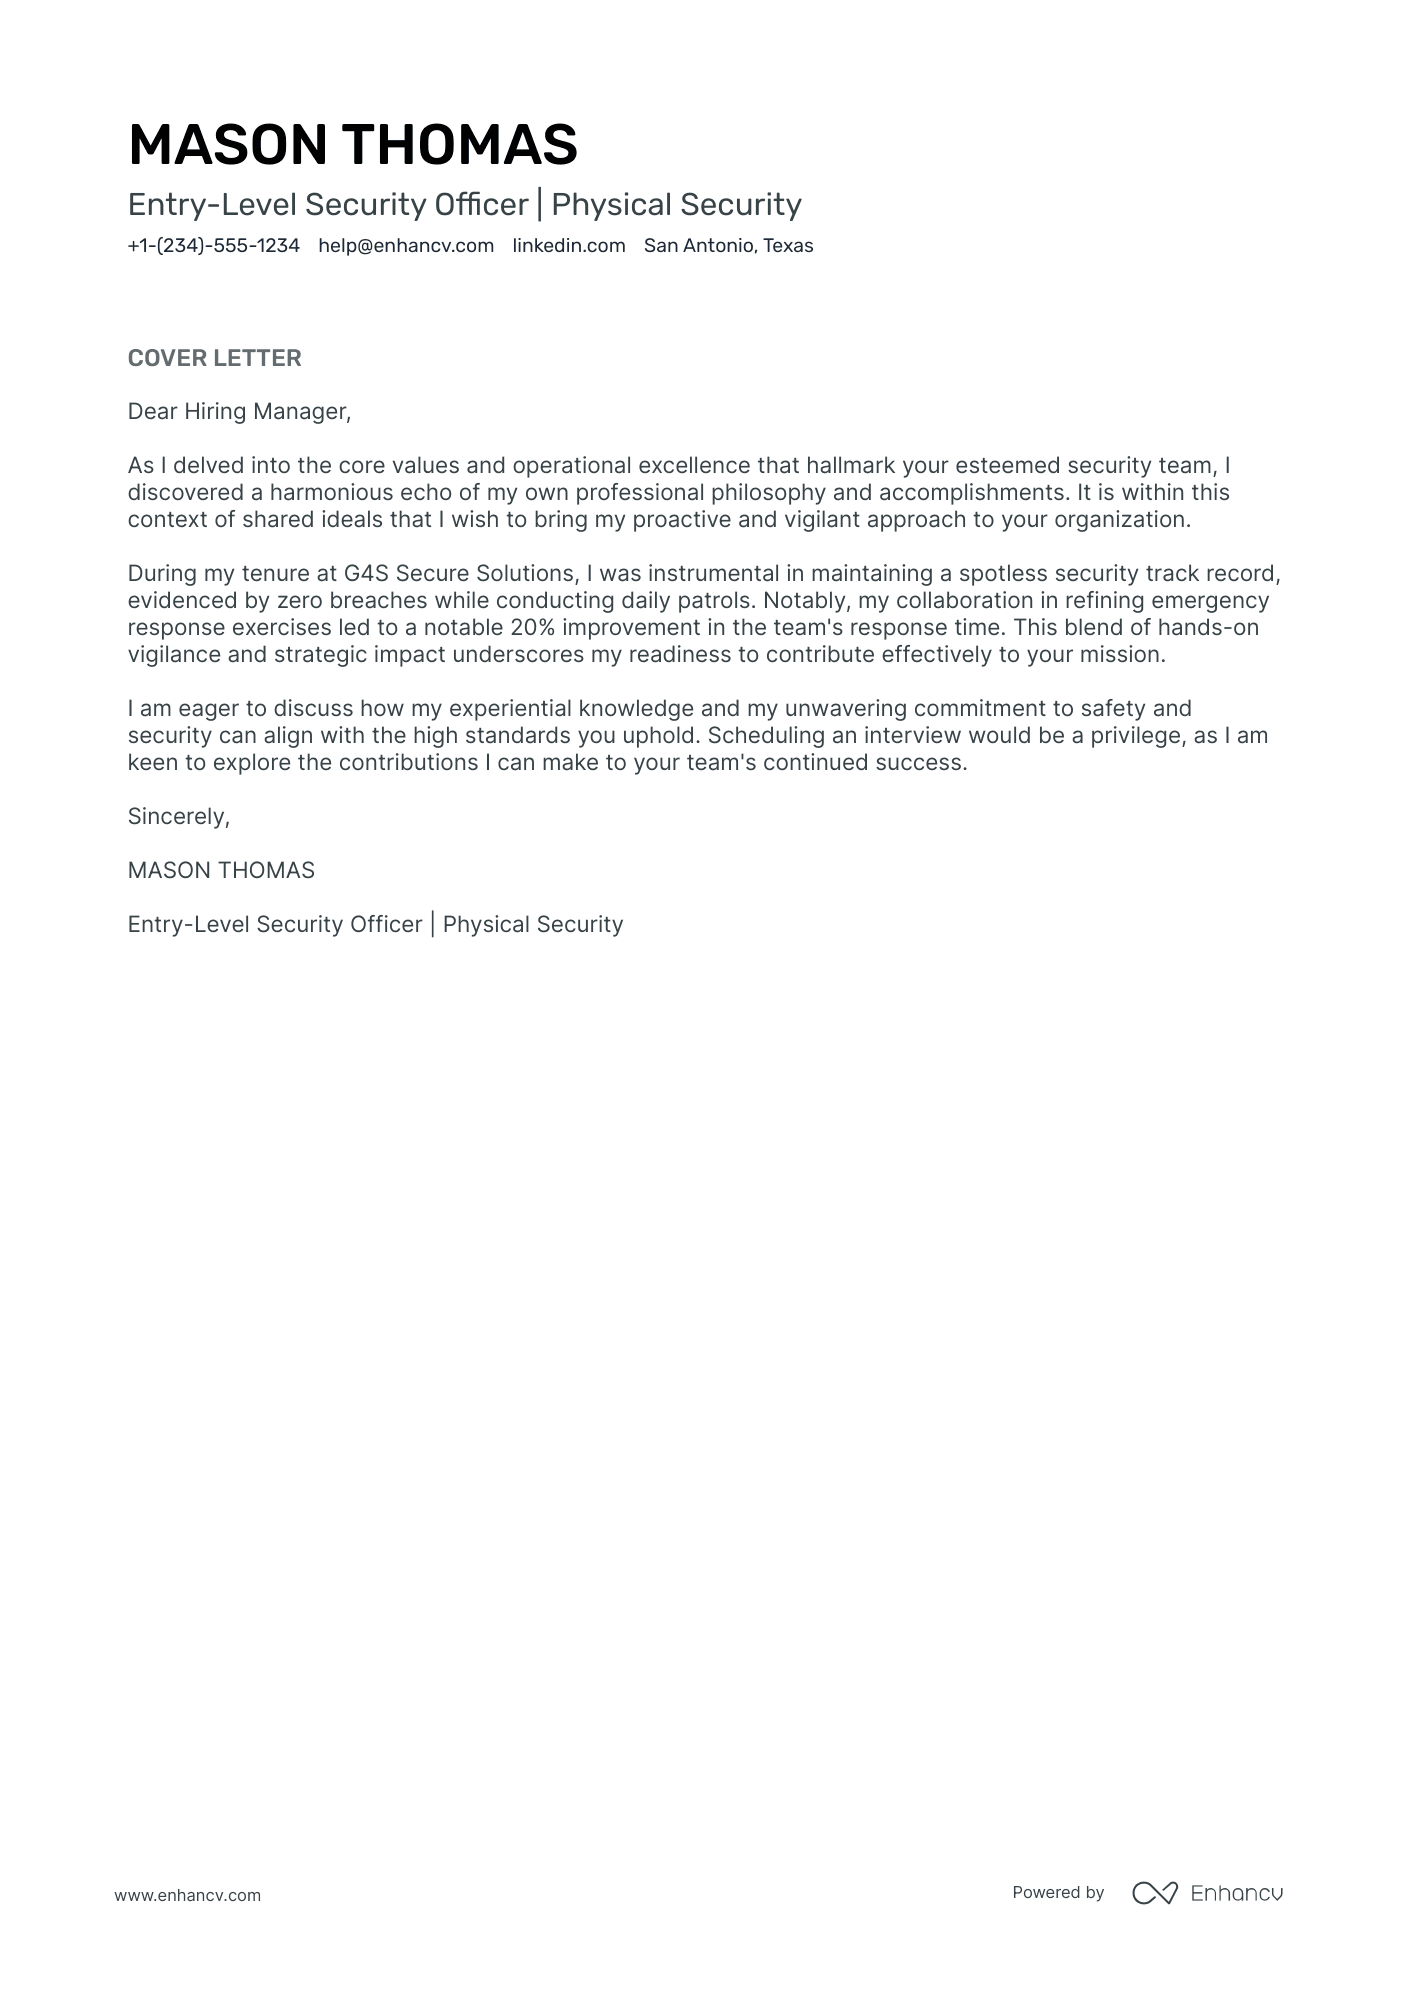 application letter of security officer